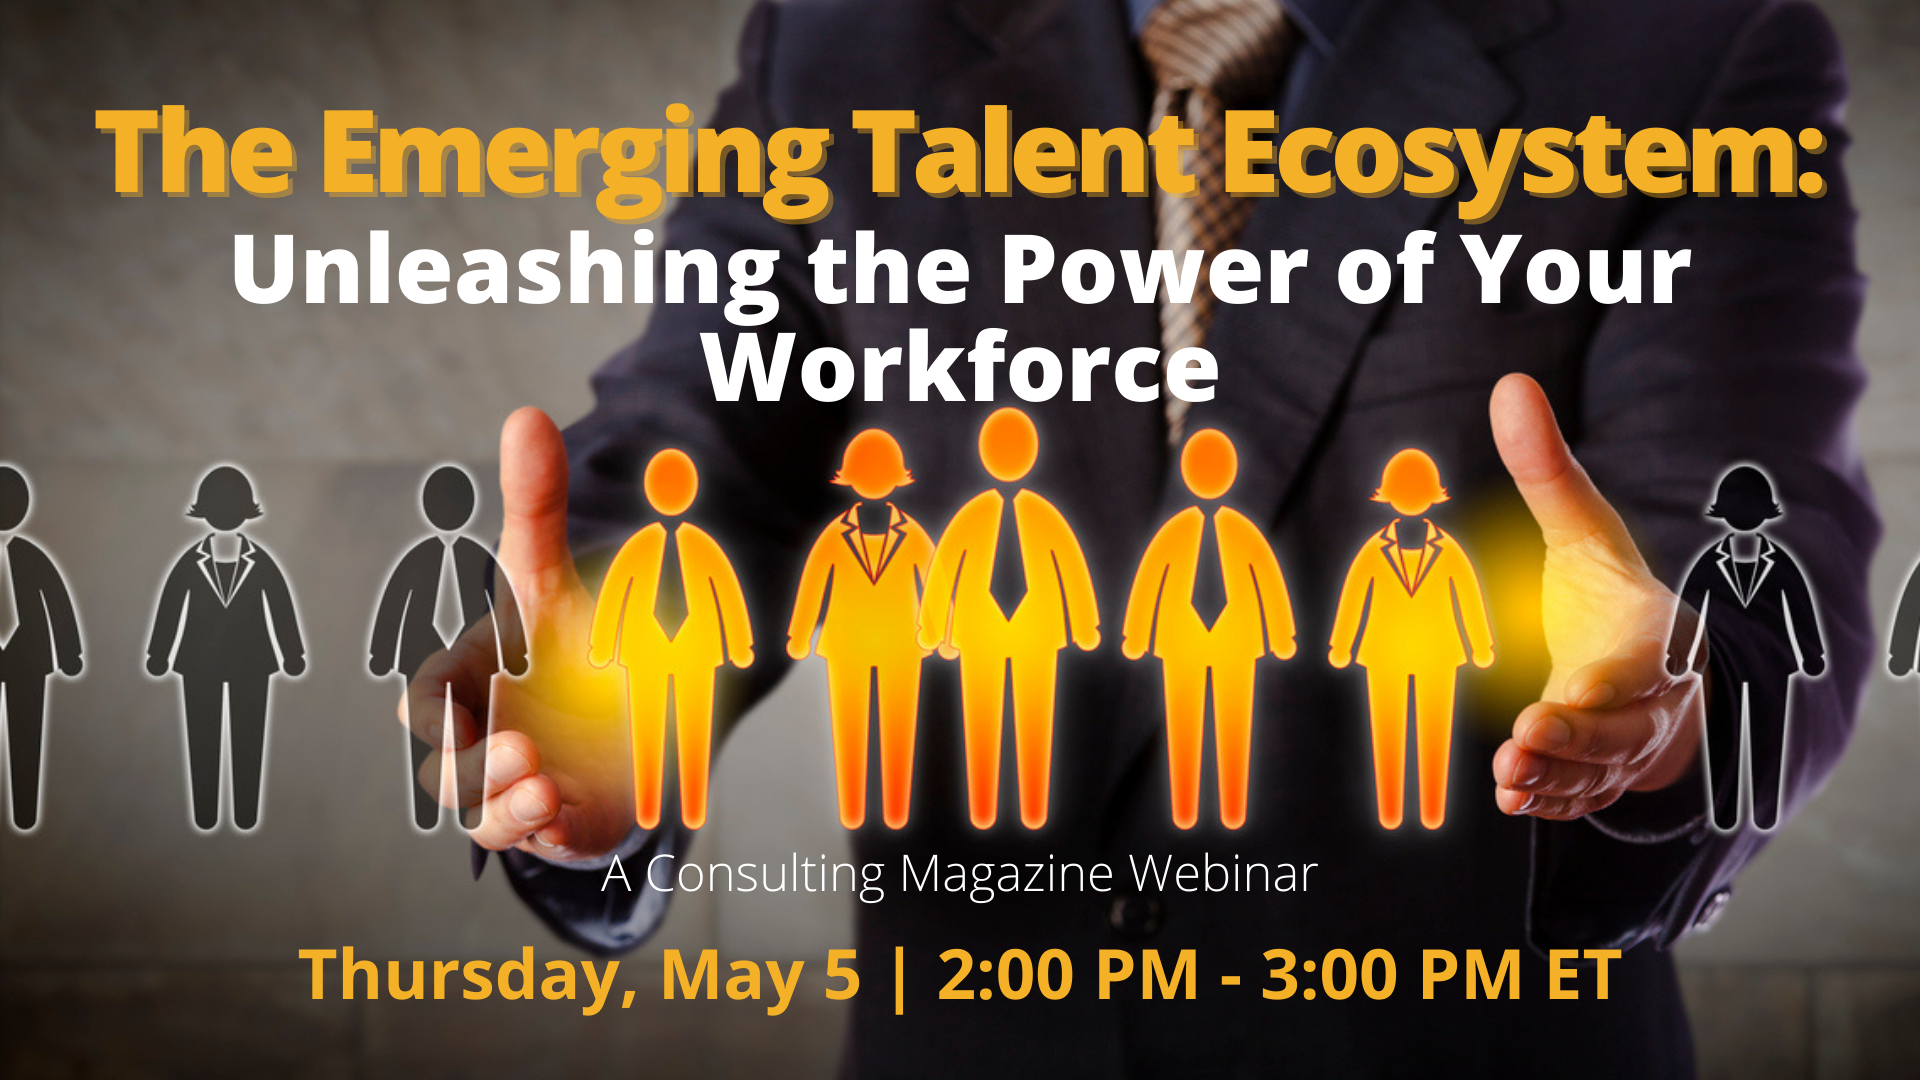 Webinar: The Emerging Talent Ecosystem - Unleashing the Power of Your Workforce